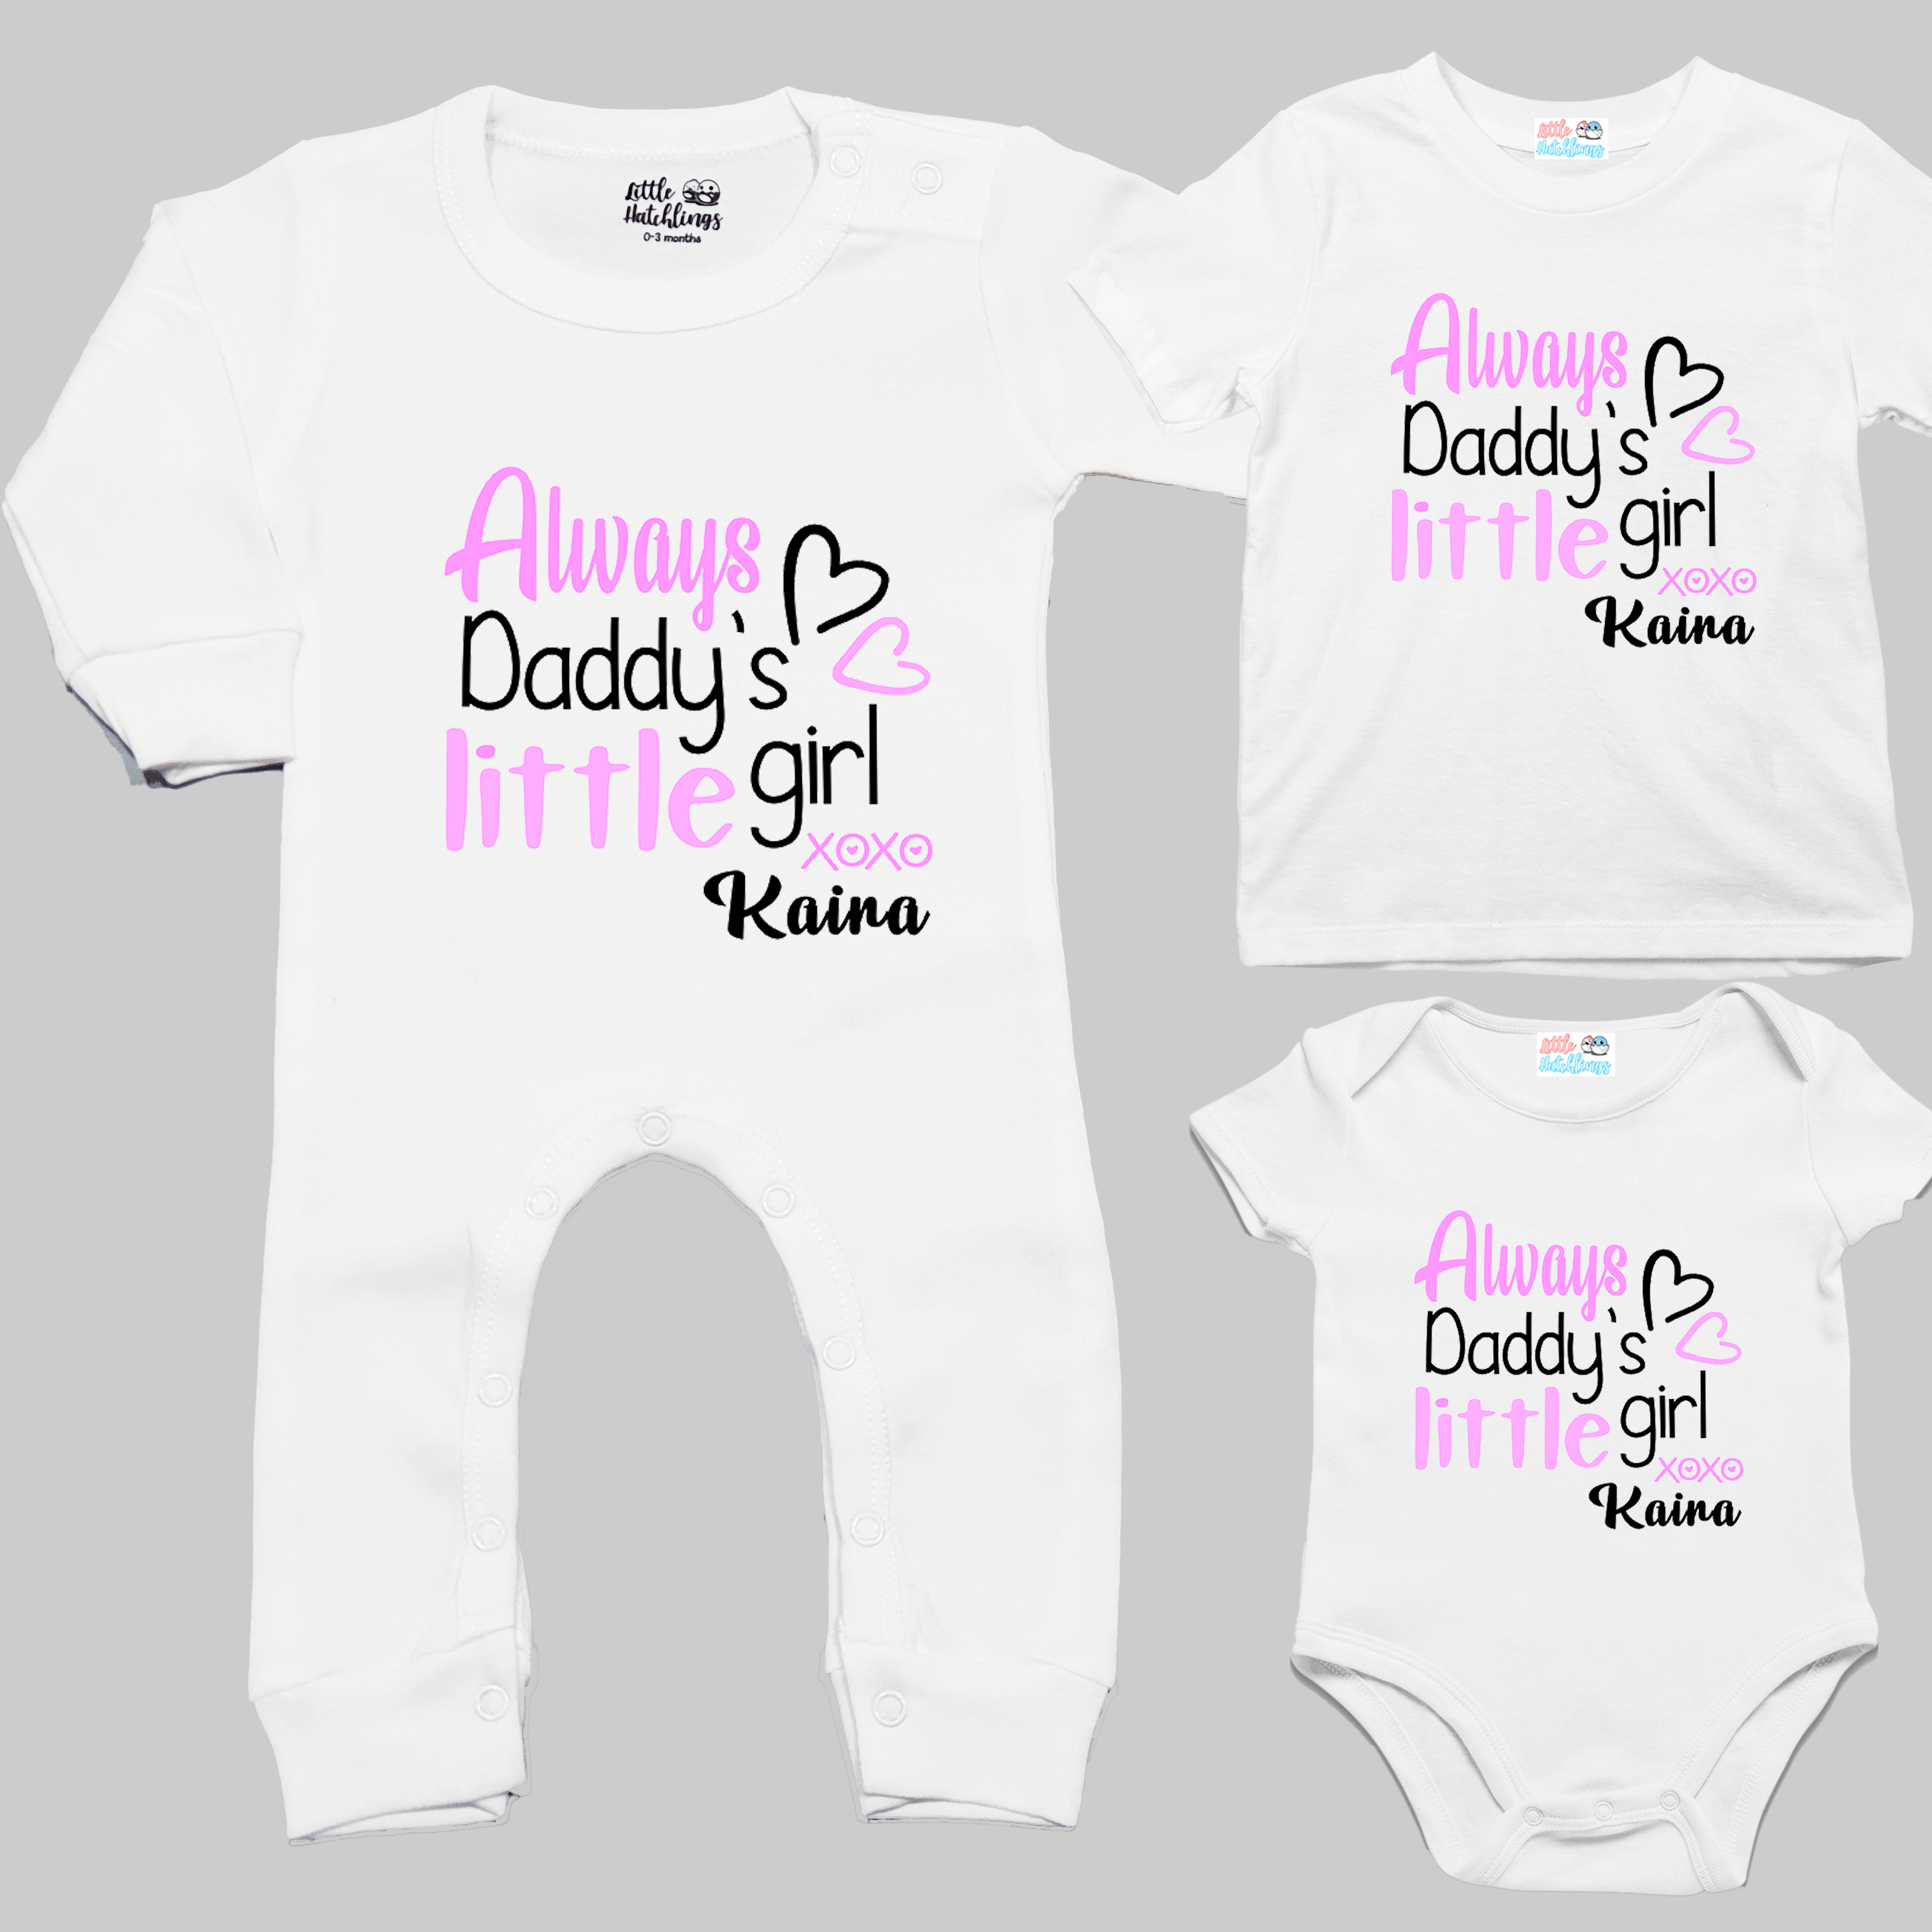 Daddy's Little Girl - Daughters Hero White Combo - Onesie + Adult T-shirt